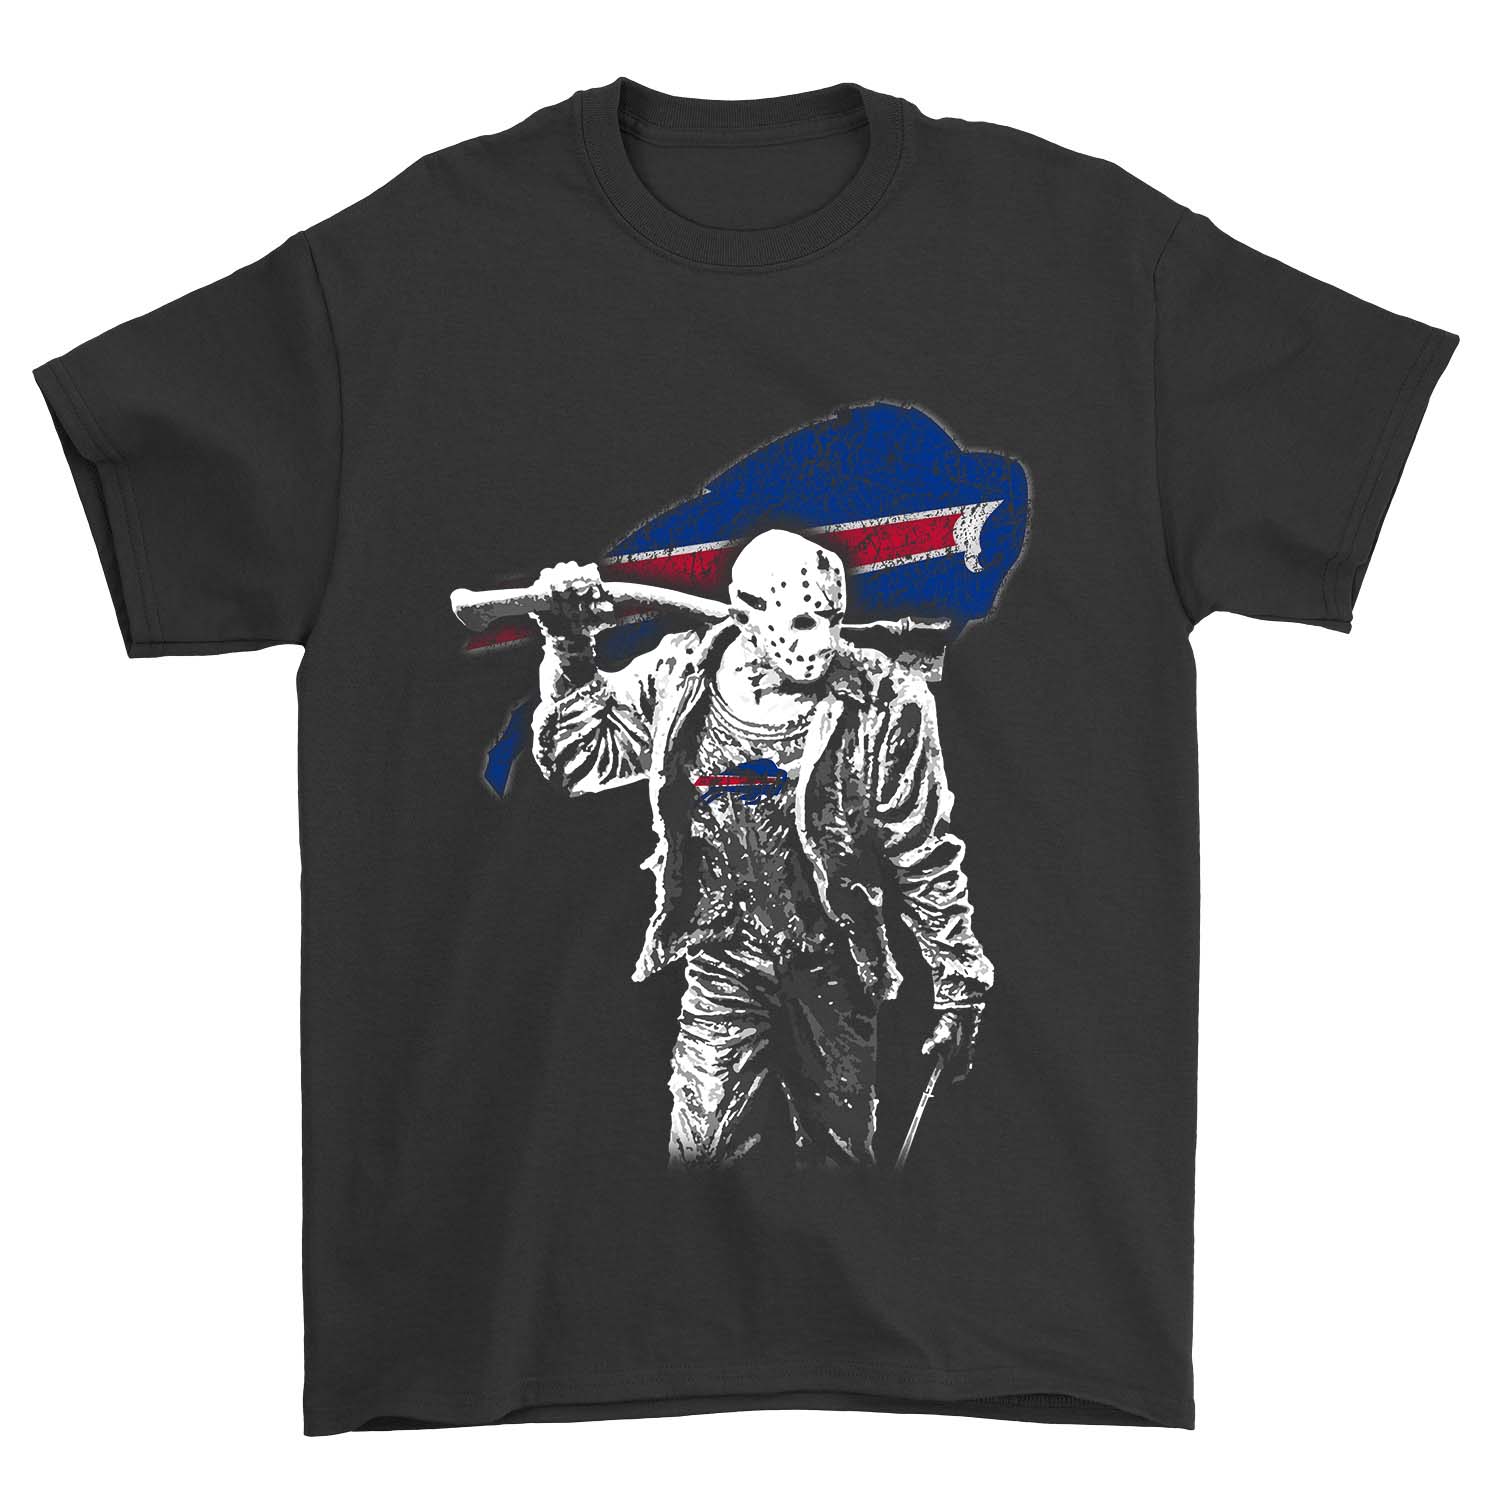 BUFFALO-BILLS-Jason-Voorhees-If-You-Are-Not-Fan-This-Is-For-You-T-SHIRT-2023